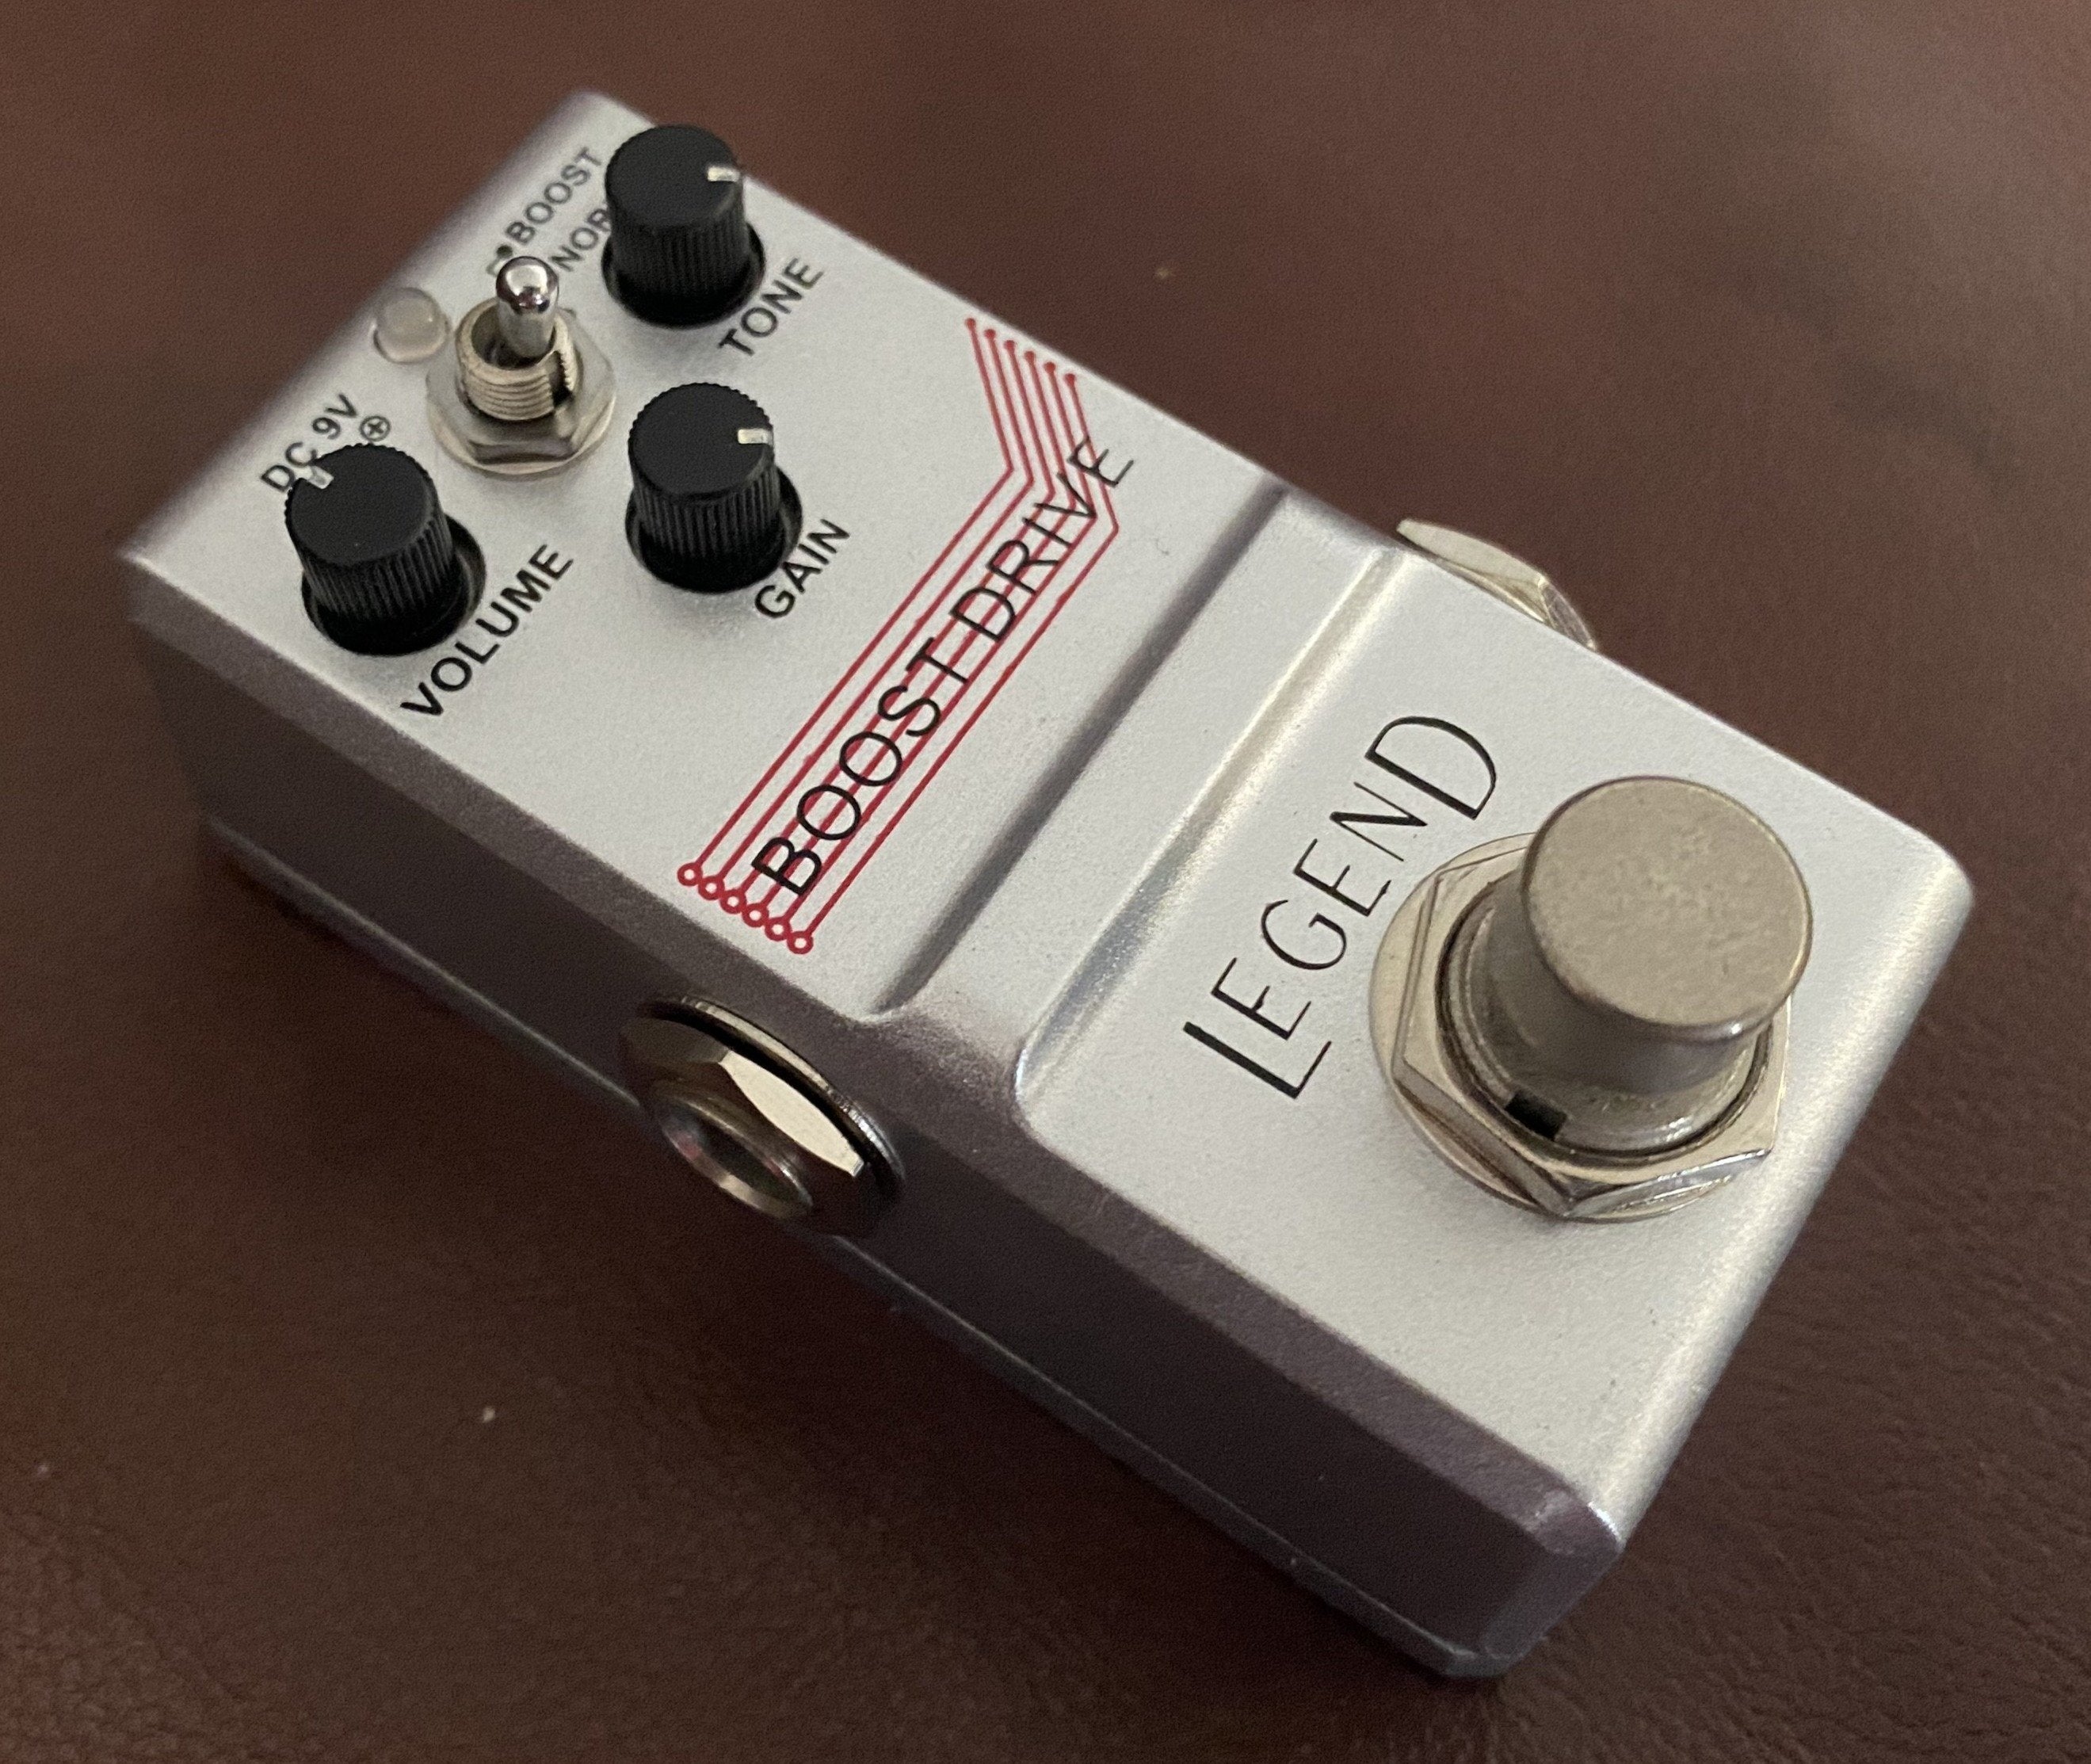 SMJ LEGEND Series Boost Drive Pedal, Accessory for sale at Richards Guitars.